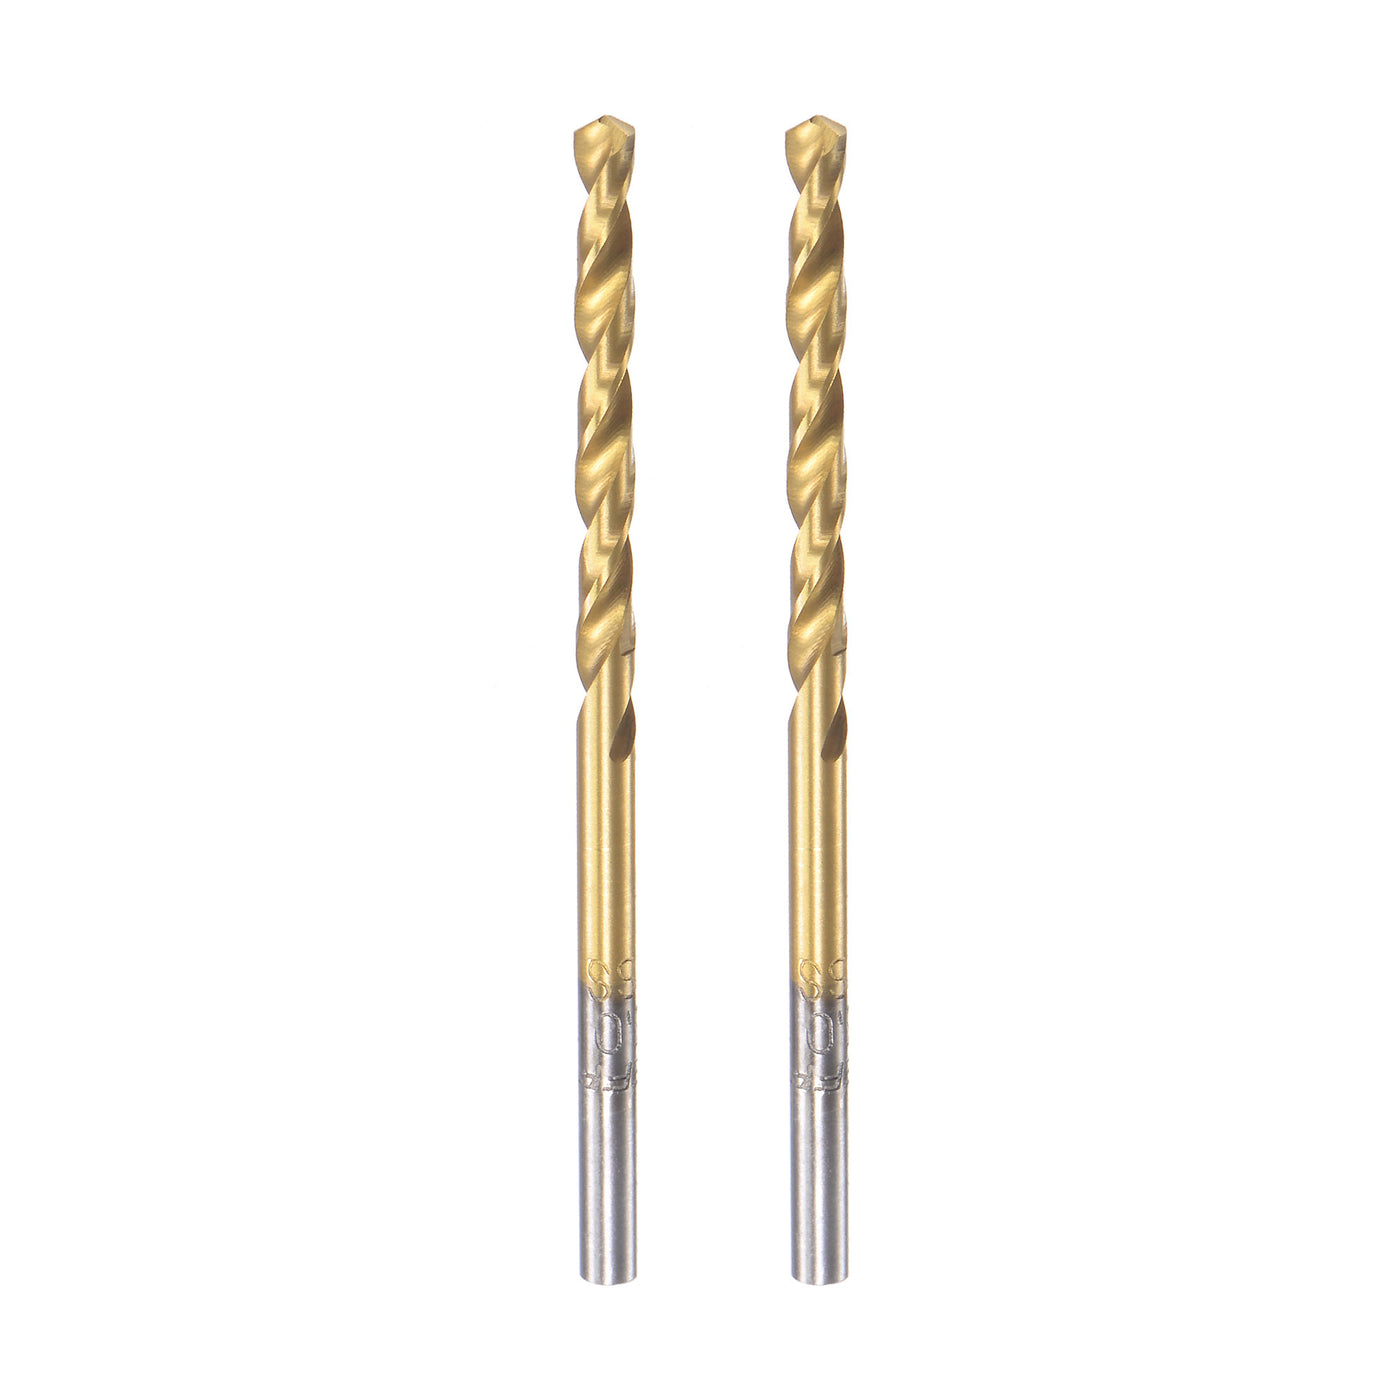 uxcell Uxcell High Speed Steel Twist Drill Bit 3mm Fully Ground Titanium Coated 2 Pcs